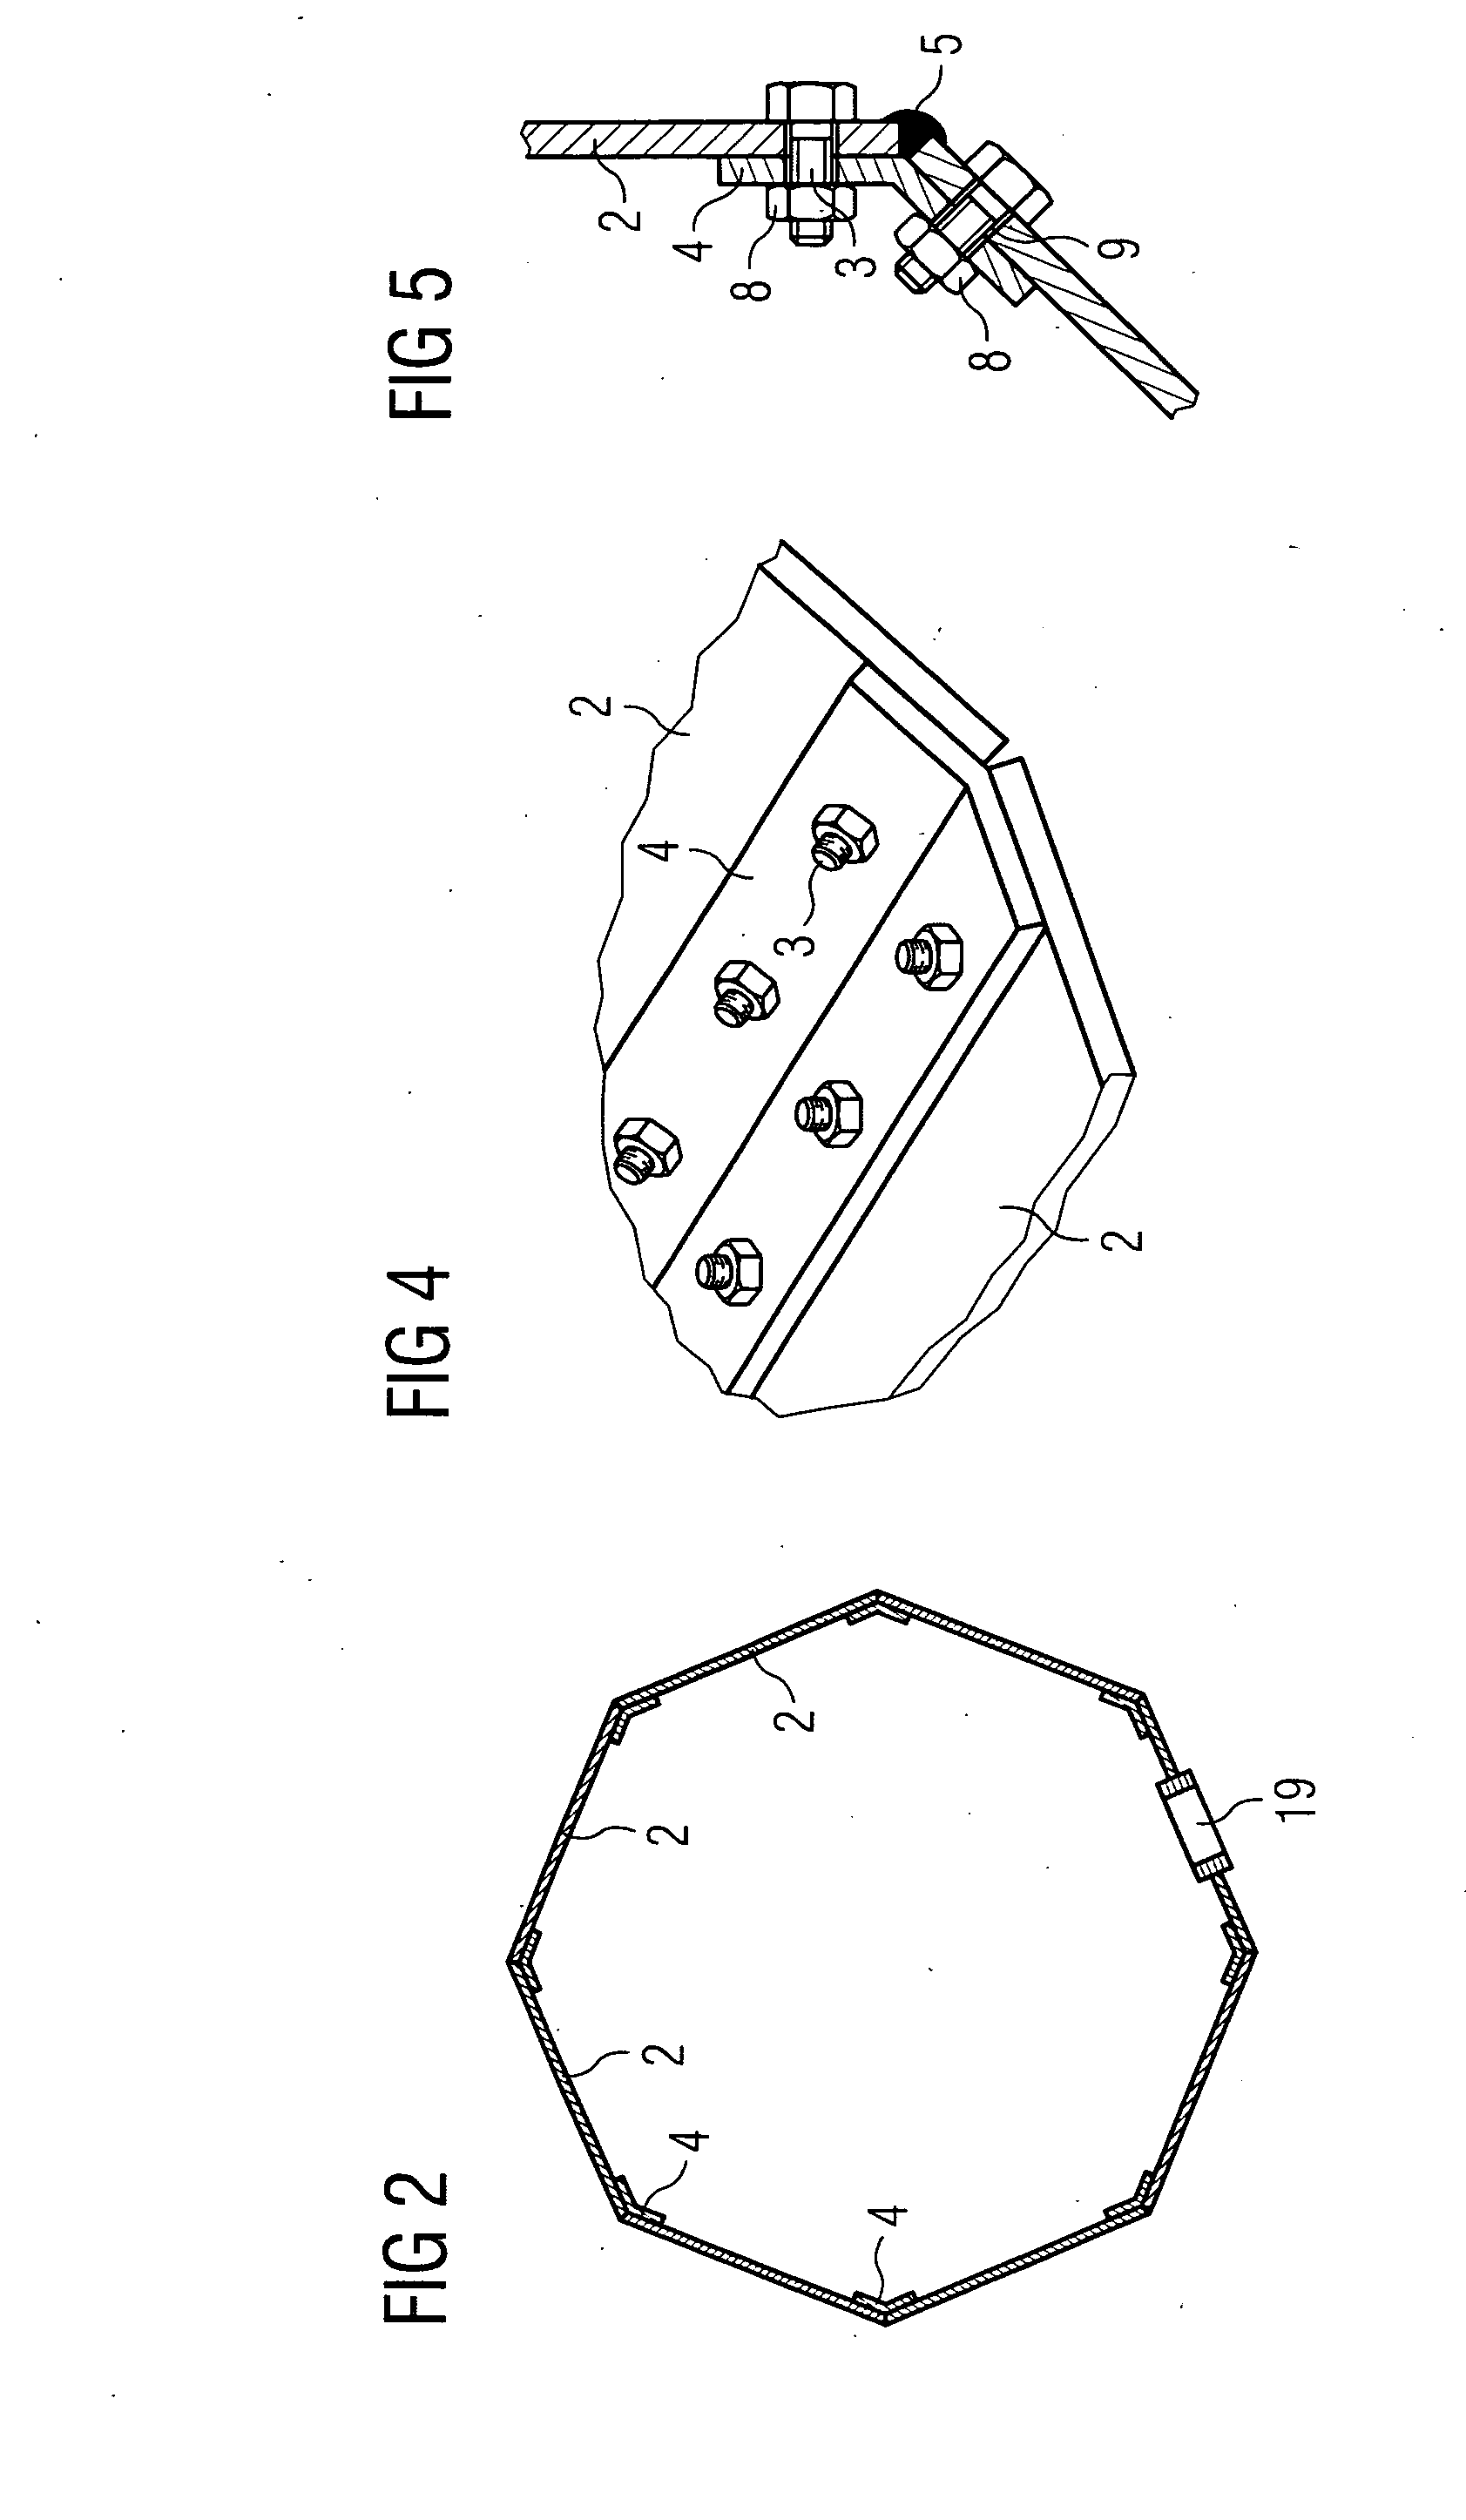 Wind turbine tower and method for constructing a wind turbine tower